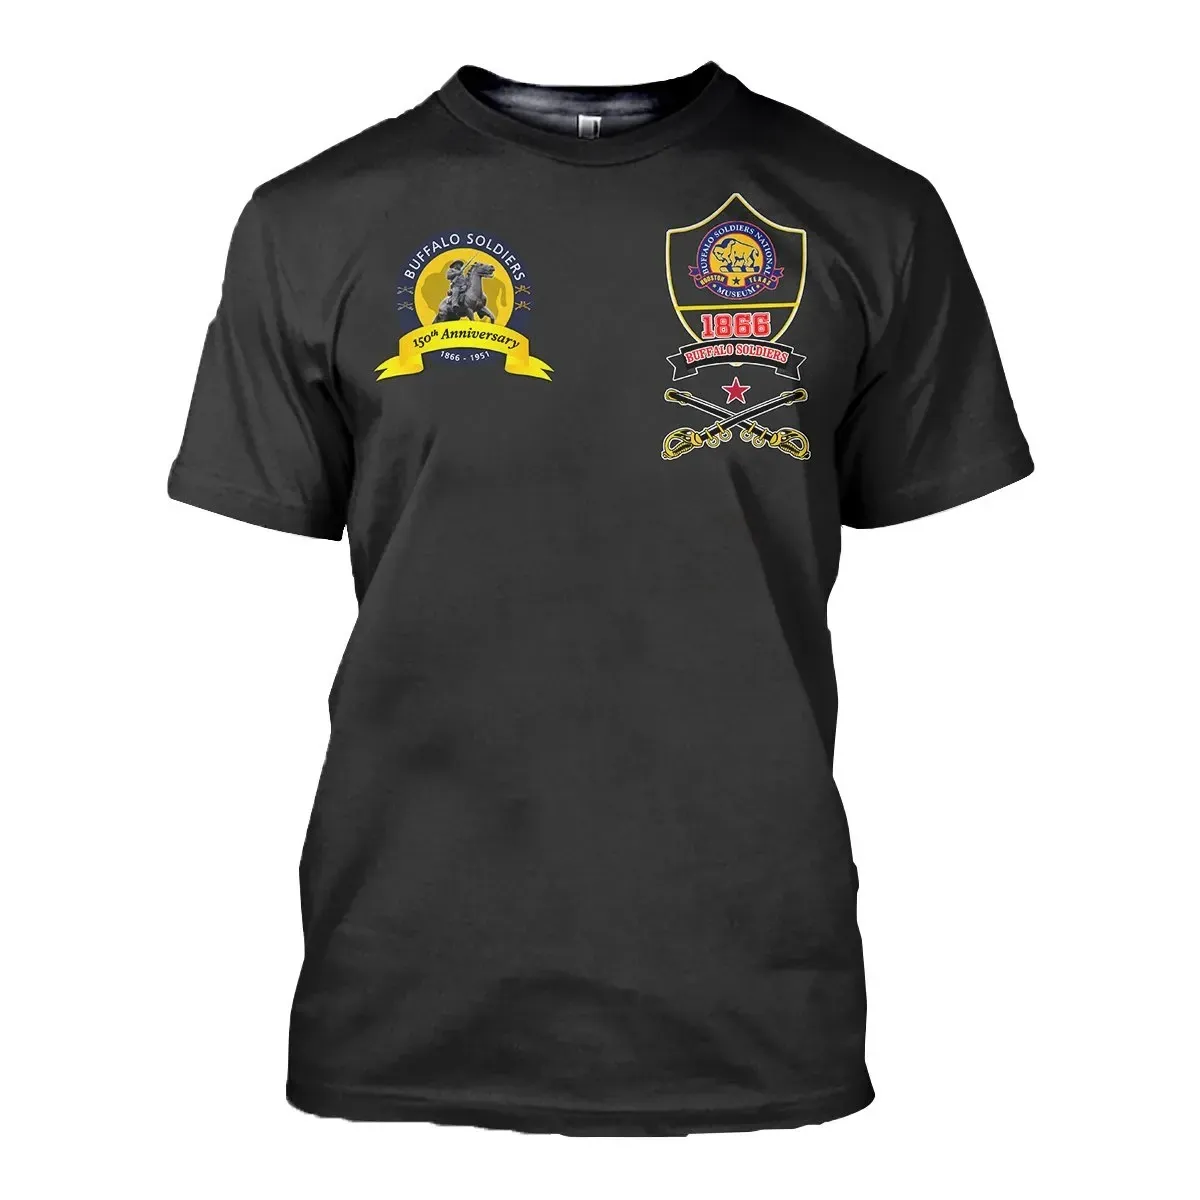 African T-shirt – Buffalo Soldiers Amazing Tee